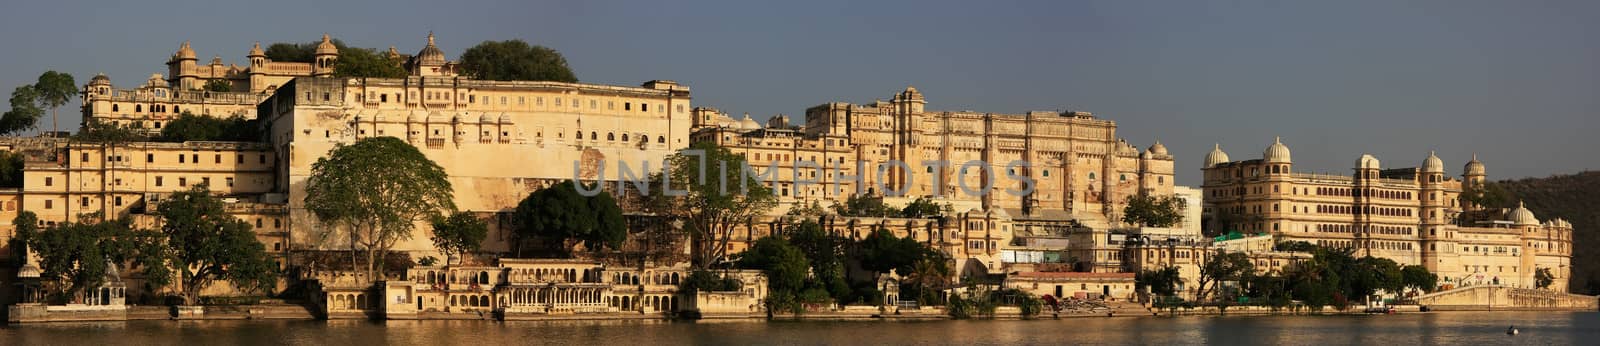 Panorama of City Palace complex, Udaipur, India by donya_nedomam